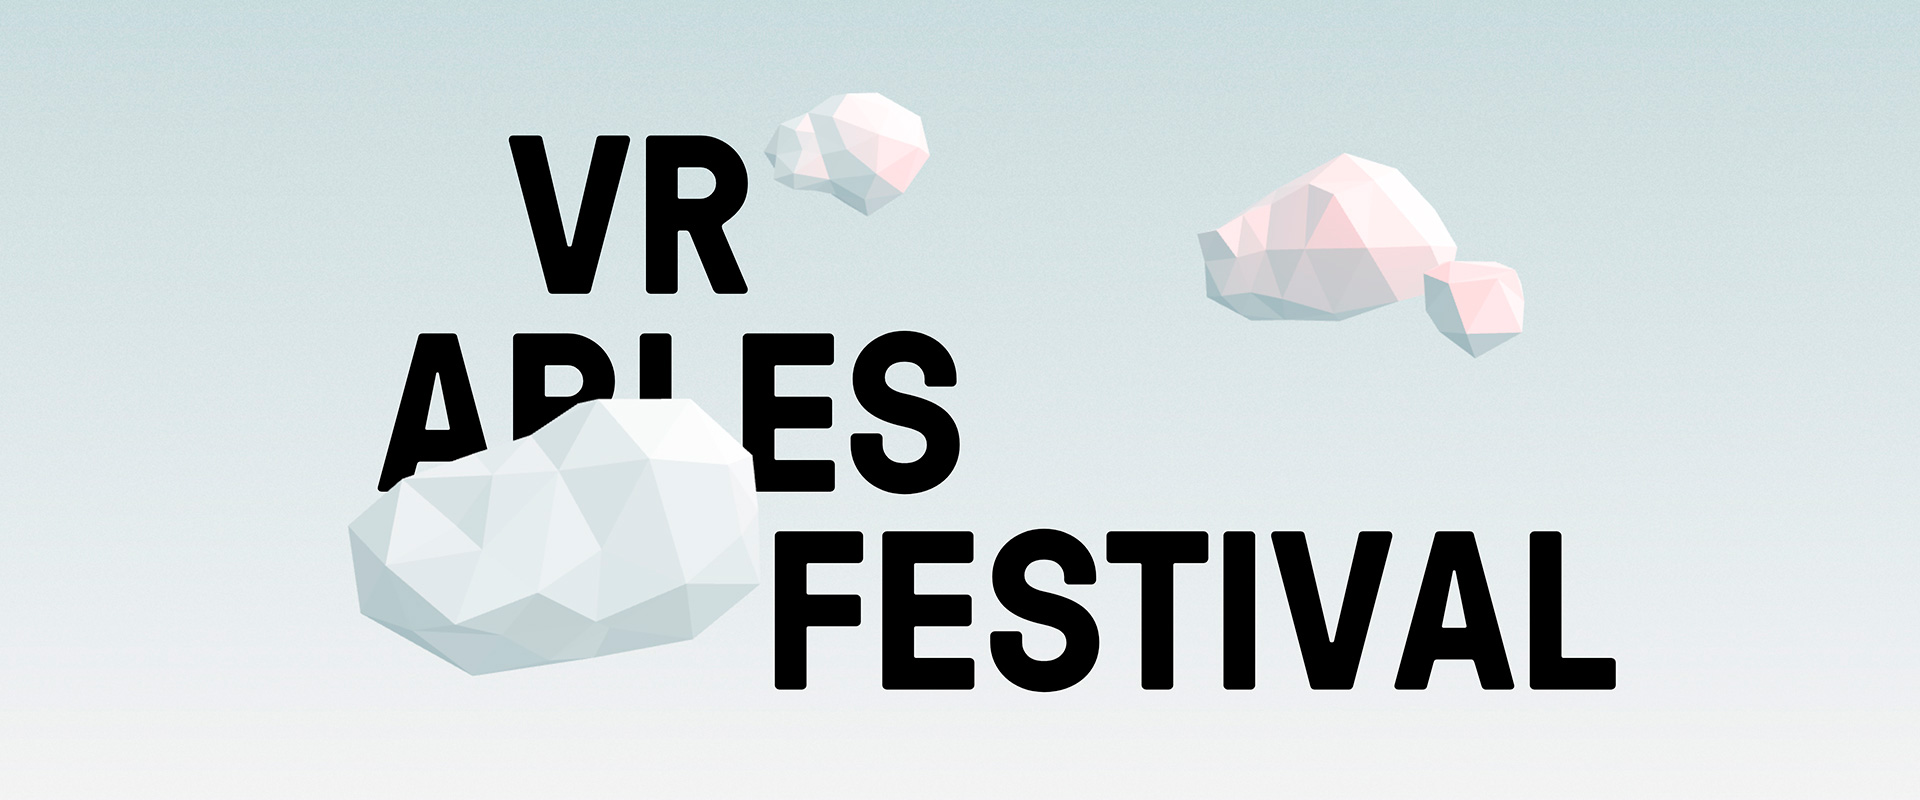 Case Study: VR Arles Festival Website by Les Animals